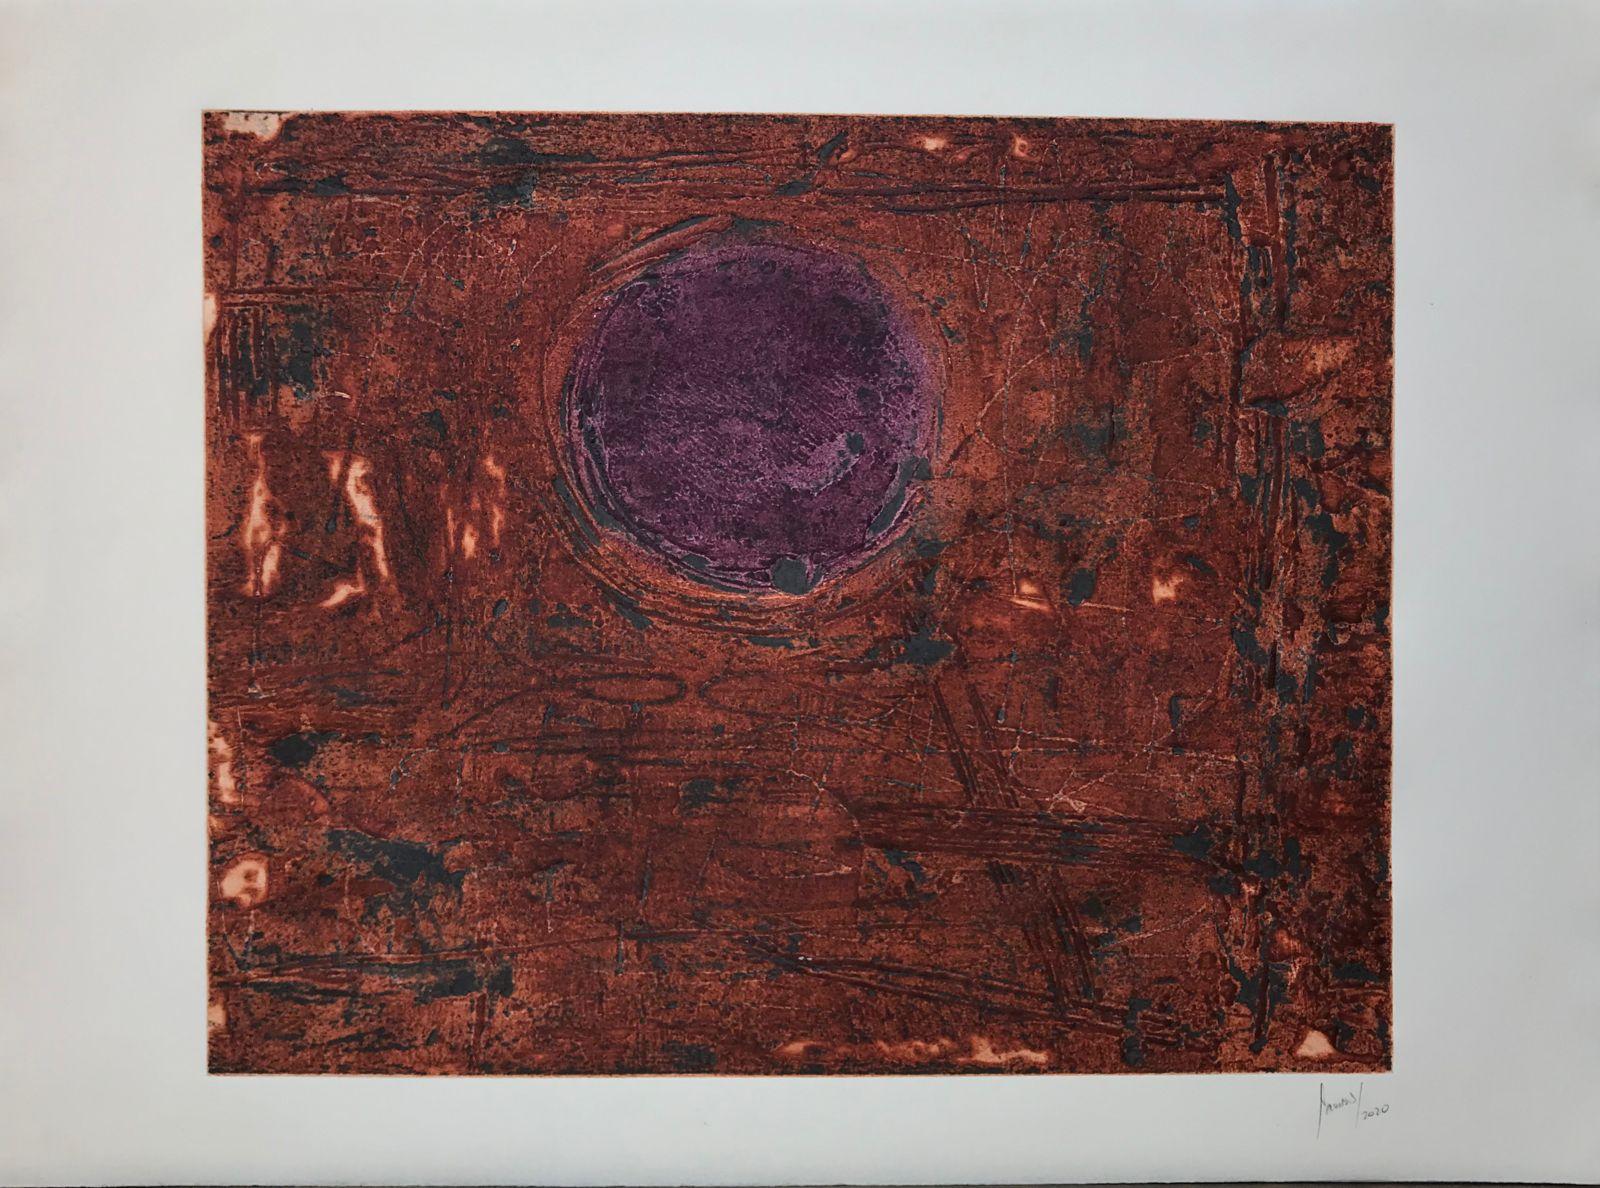 Adan Paredes, ¨Untitled¨, 2020, Collagraph, 22x29.9 in